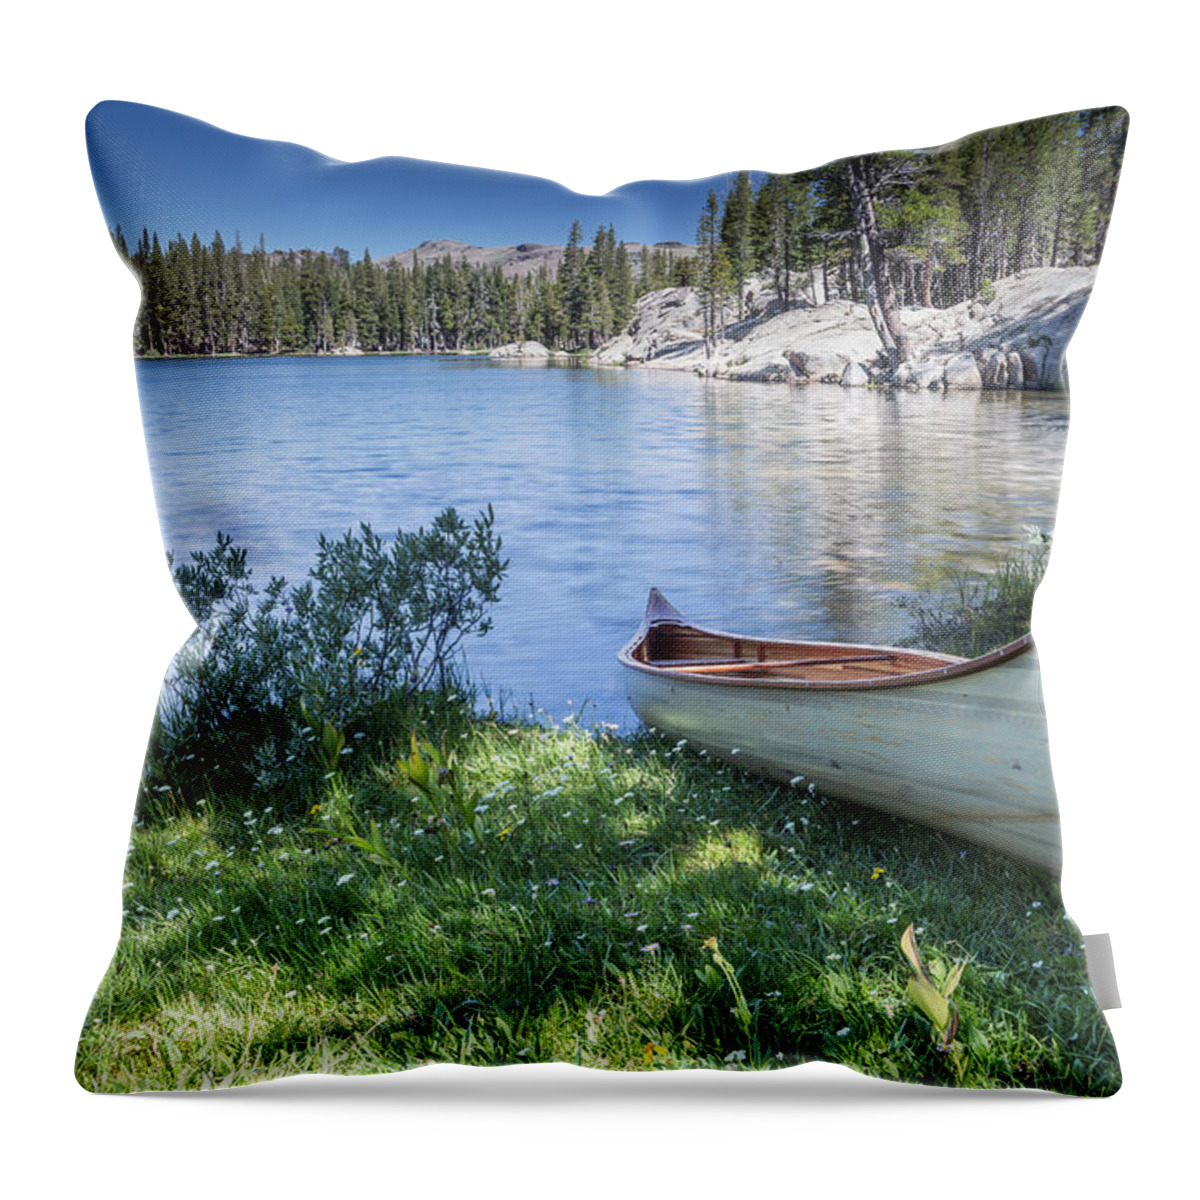 Horizontal Throw Pillow featuring the photograph My Journey by Jon Glaser